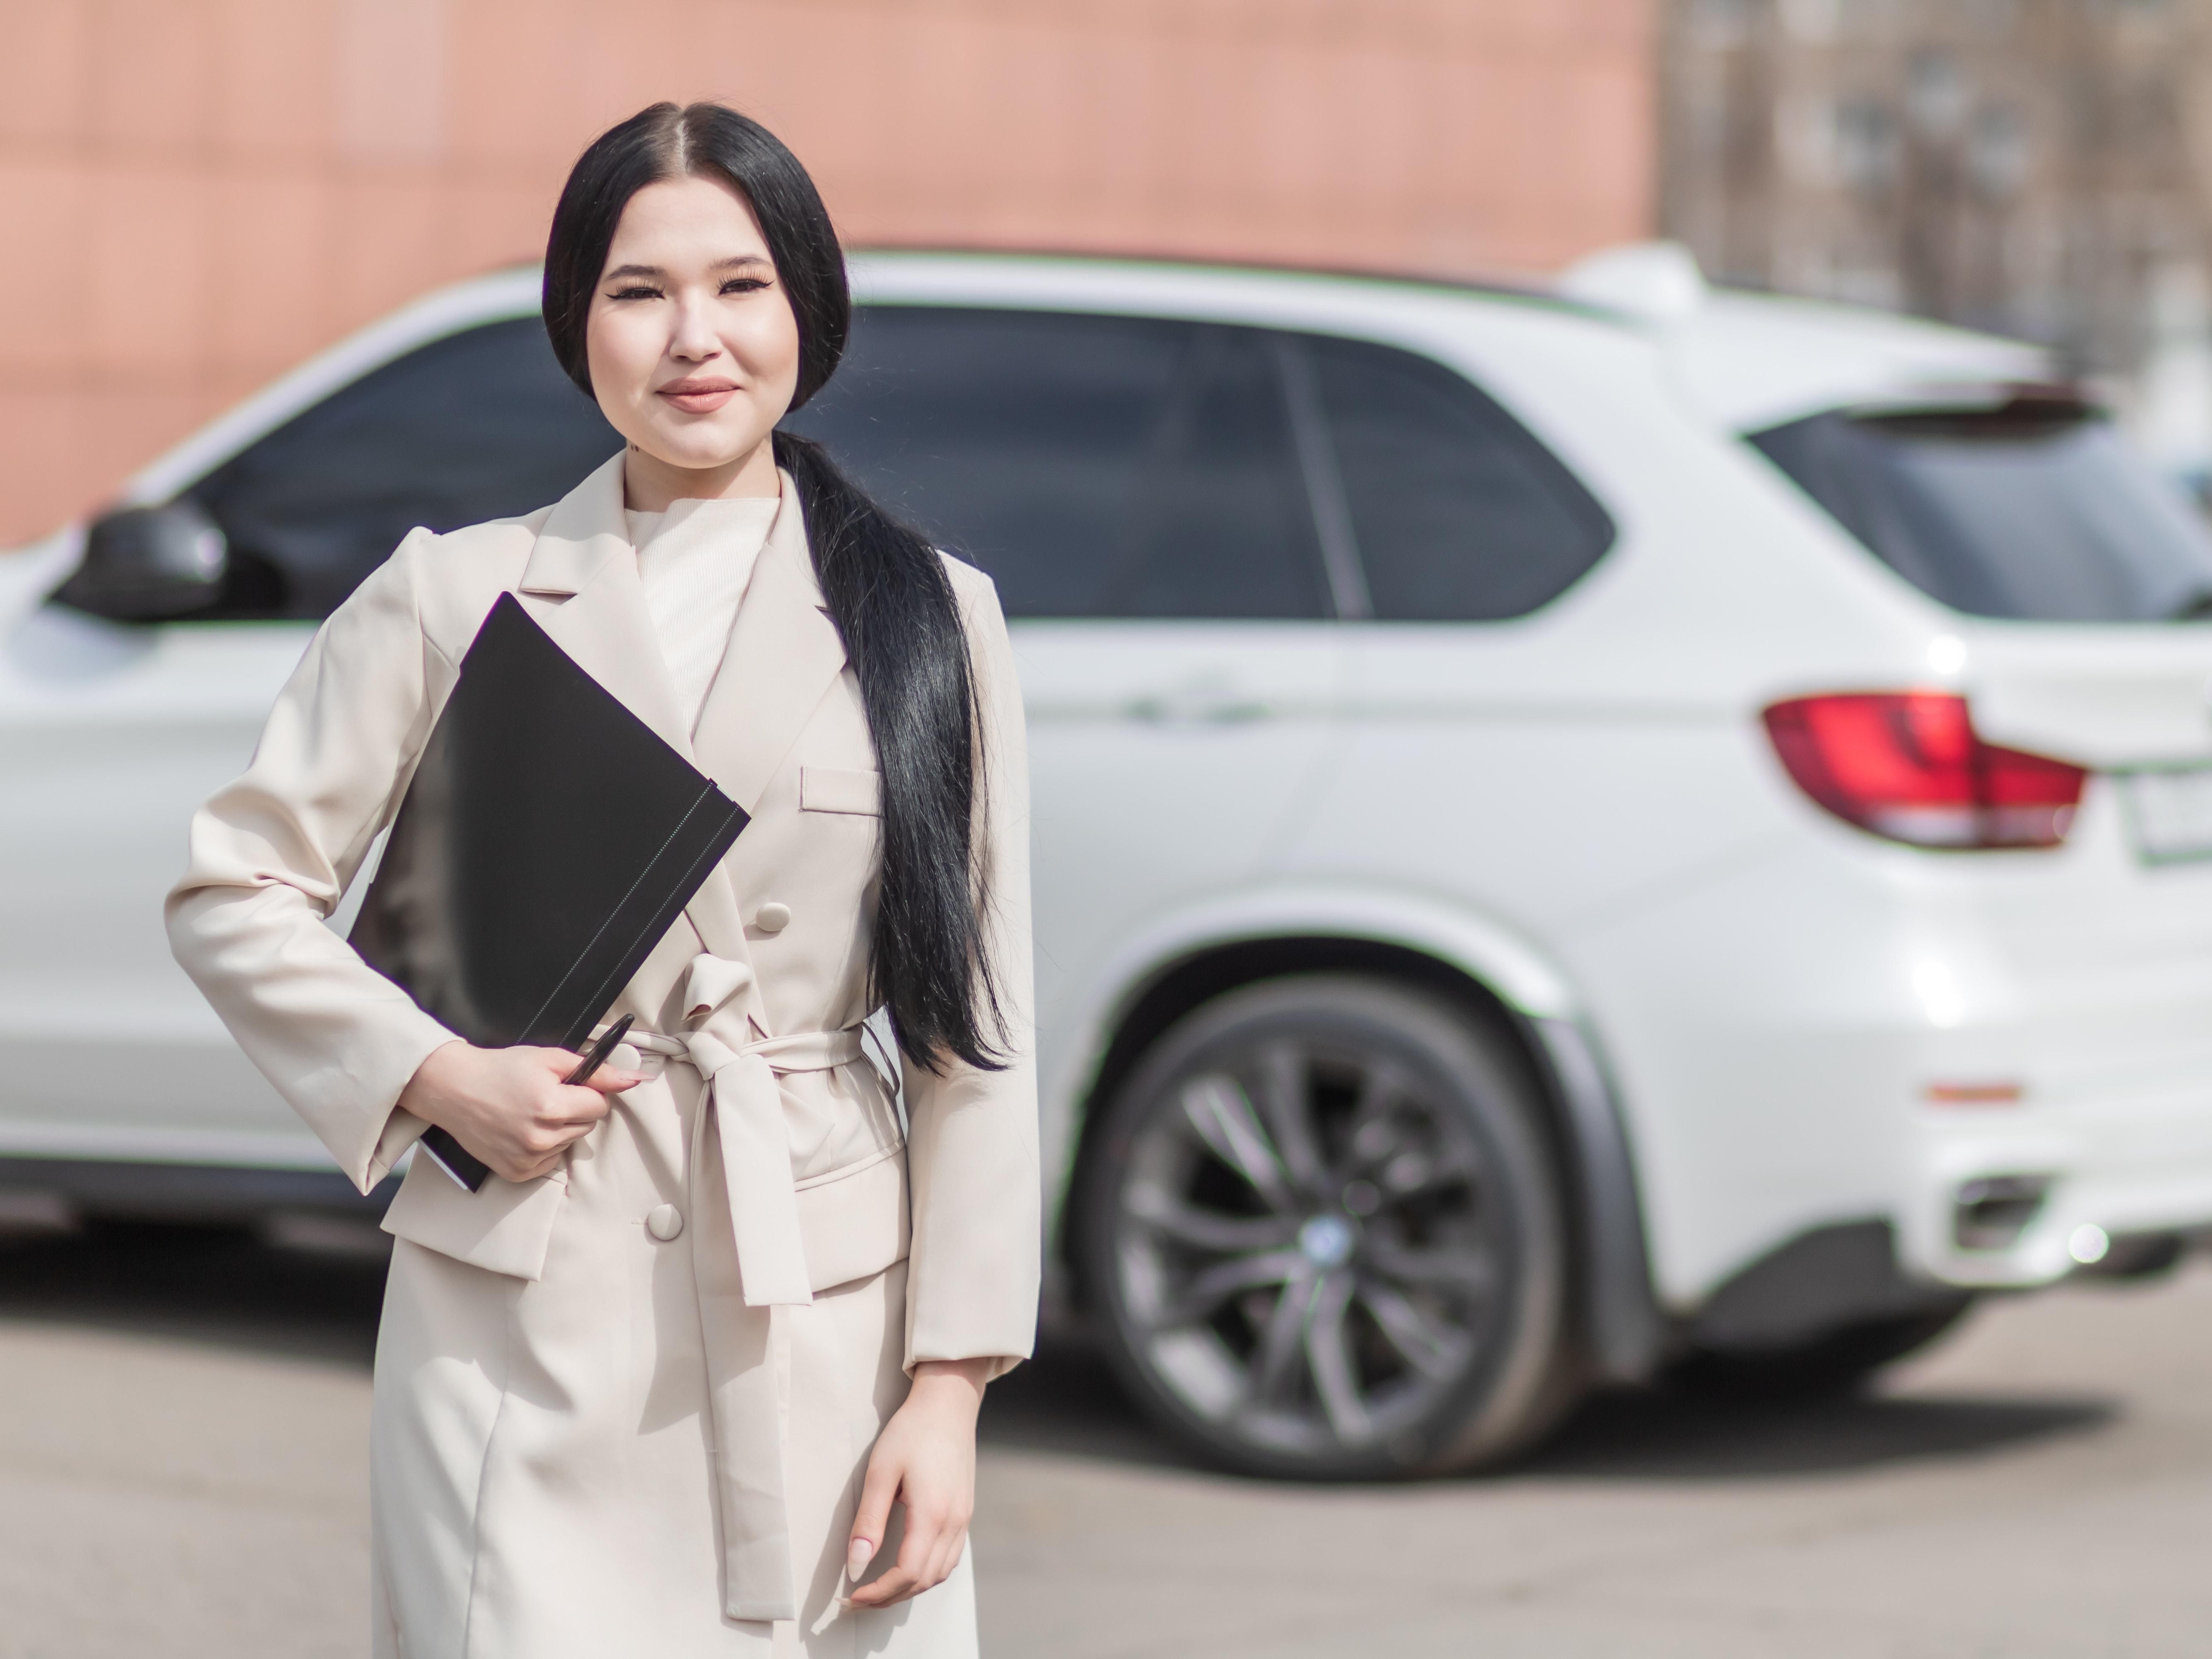 Photo by Mikhail Nilov: https://www.pexels.com/photo/woman-in-beige-corporate-clothes-holding-black-folder-7736045/